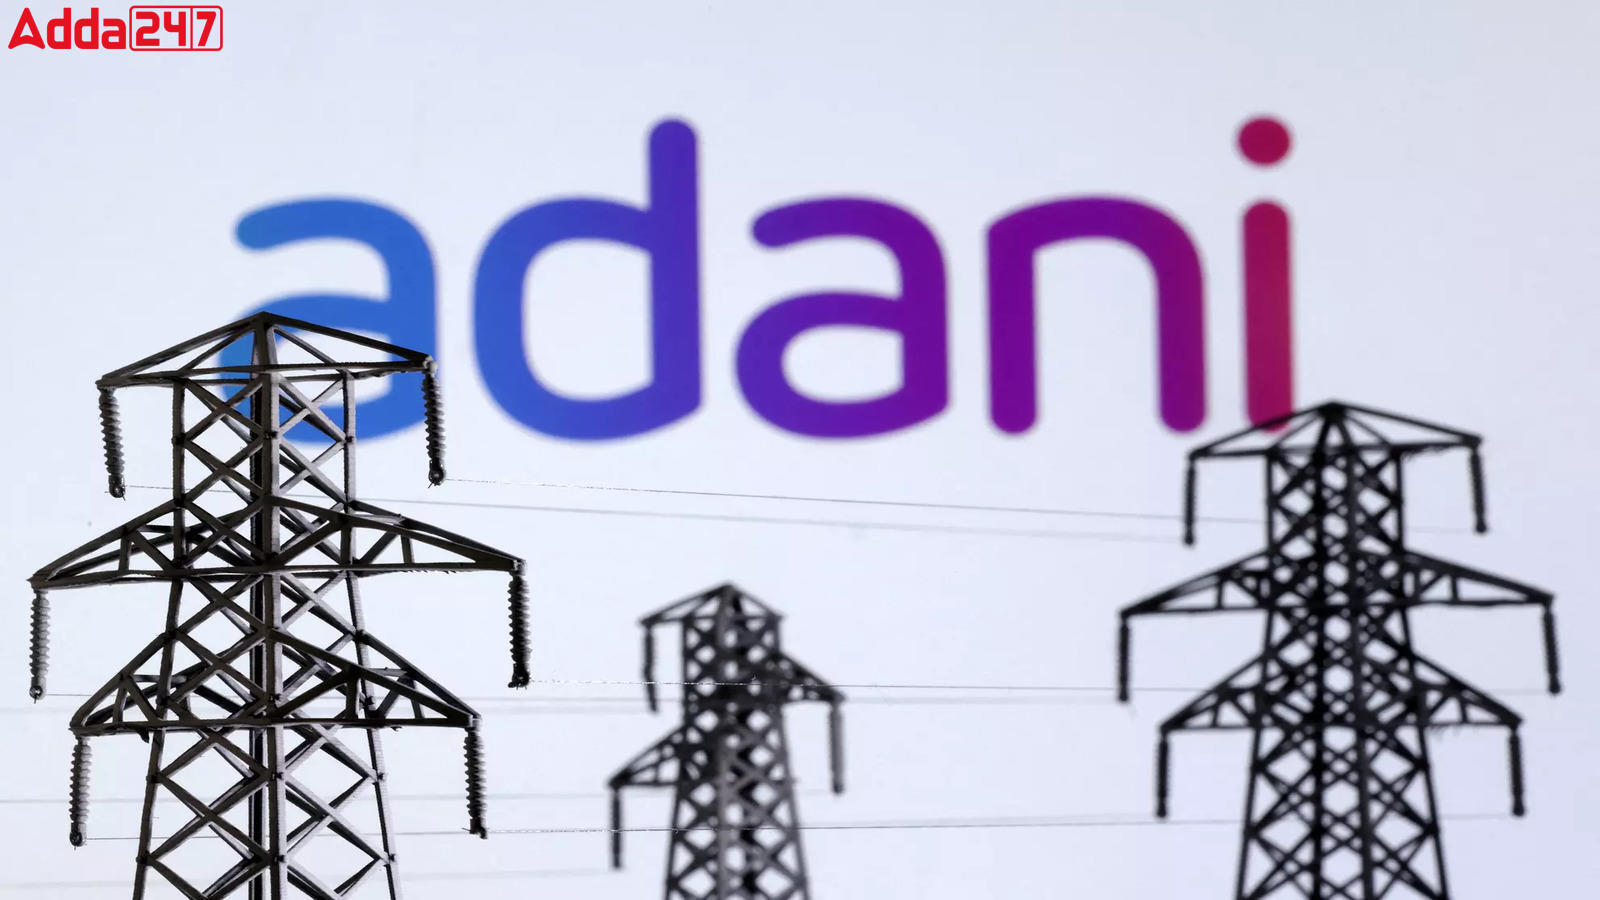 Competition Commission of India (CCI) Approves Acquisition of Lanco Amarkantak Power Limited by Adani Power Limited